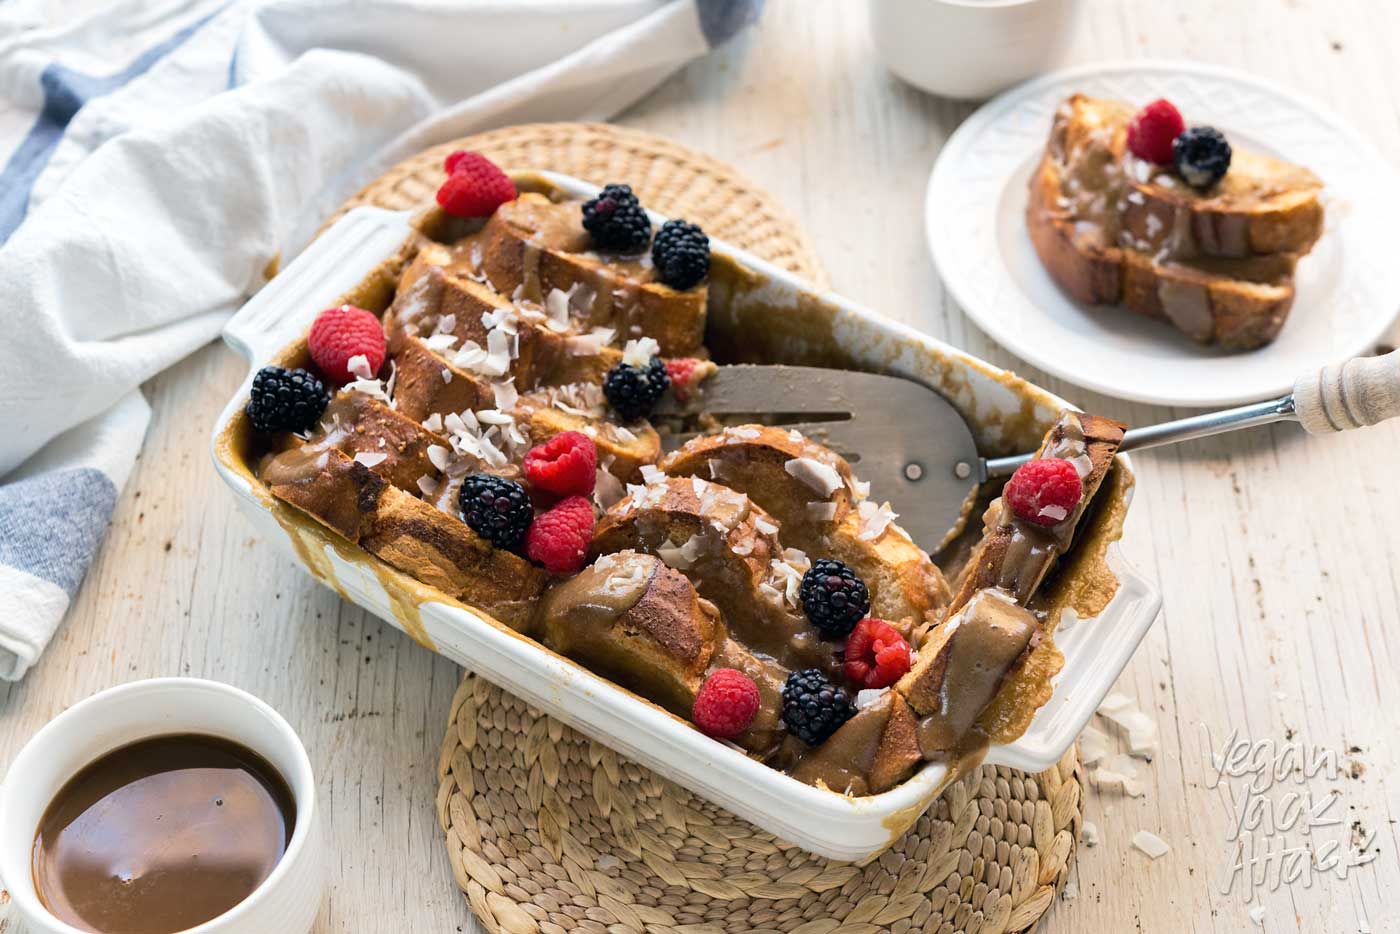 Salted Caramel French Toast Casserole? Yes, please! This decadent brunch staple is vegan, soy-free, and ridiculously delectable. Give it a try, you won't regret it!